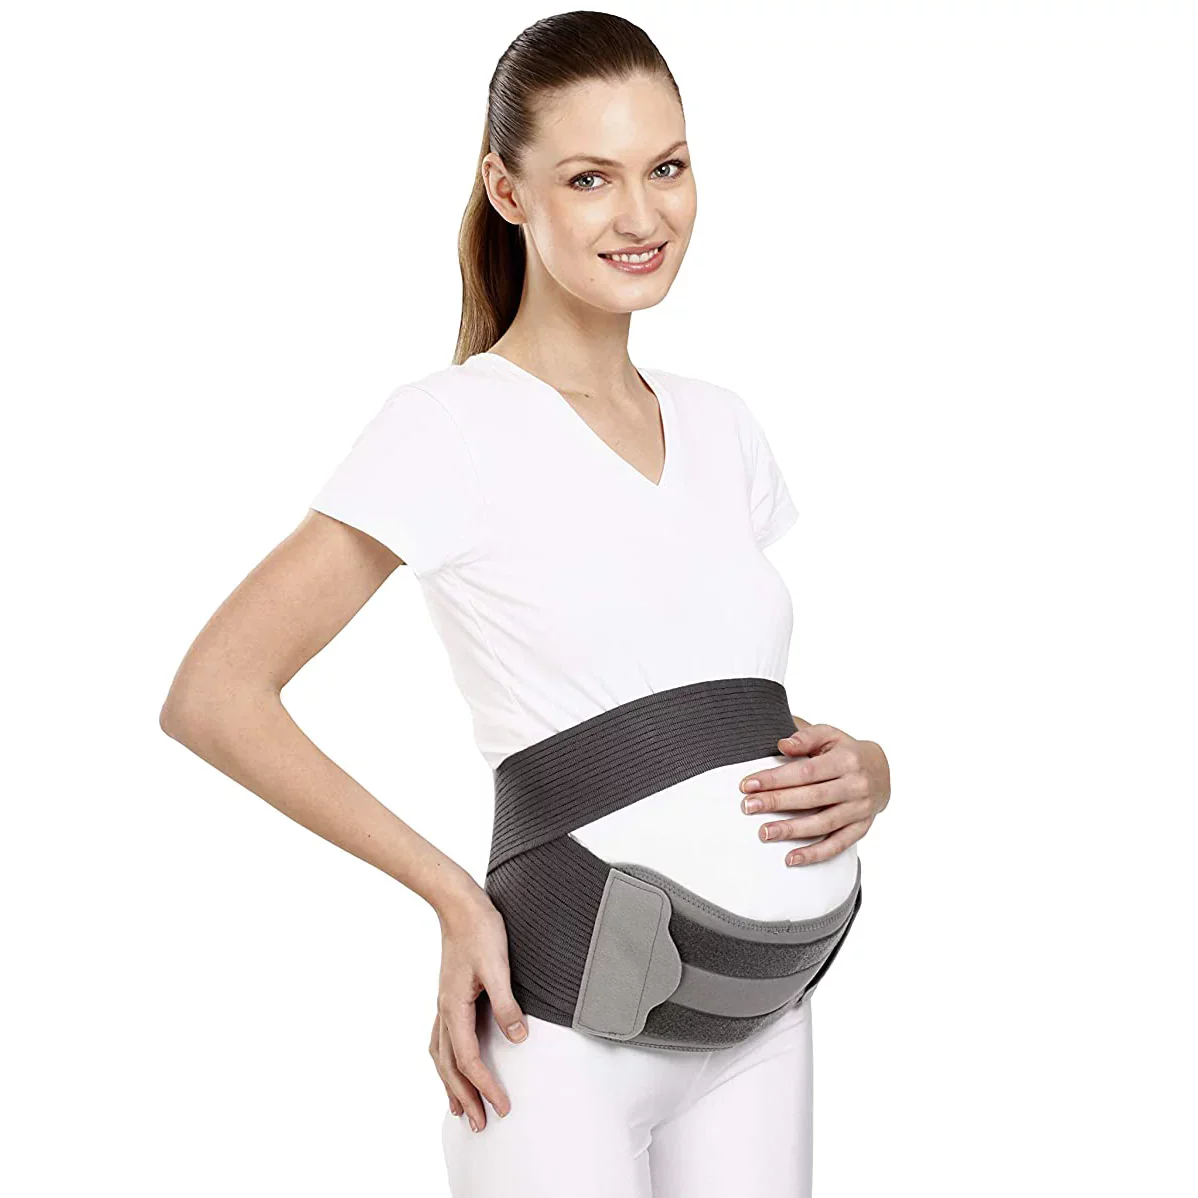 Pregnancy Belly Support Belt - For Comfort and Relief